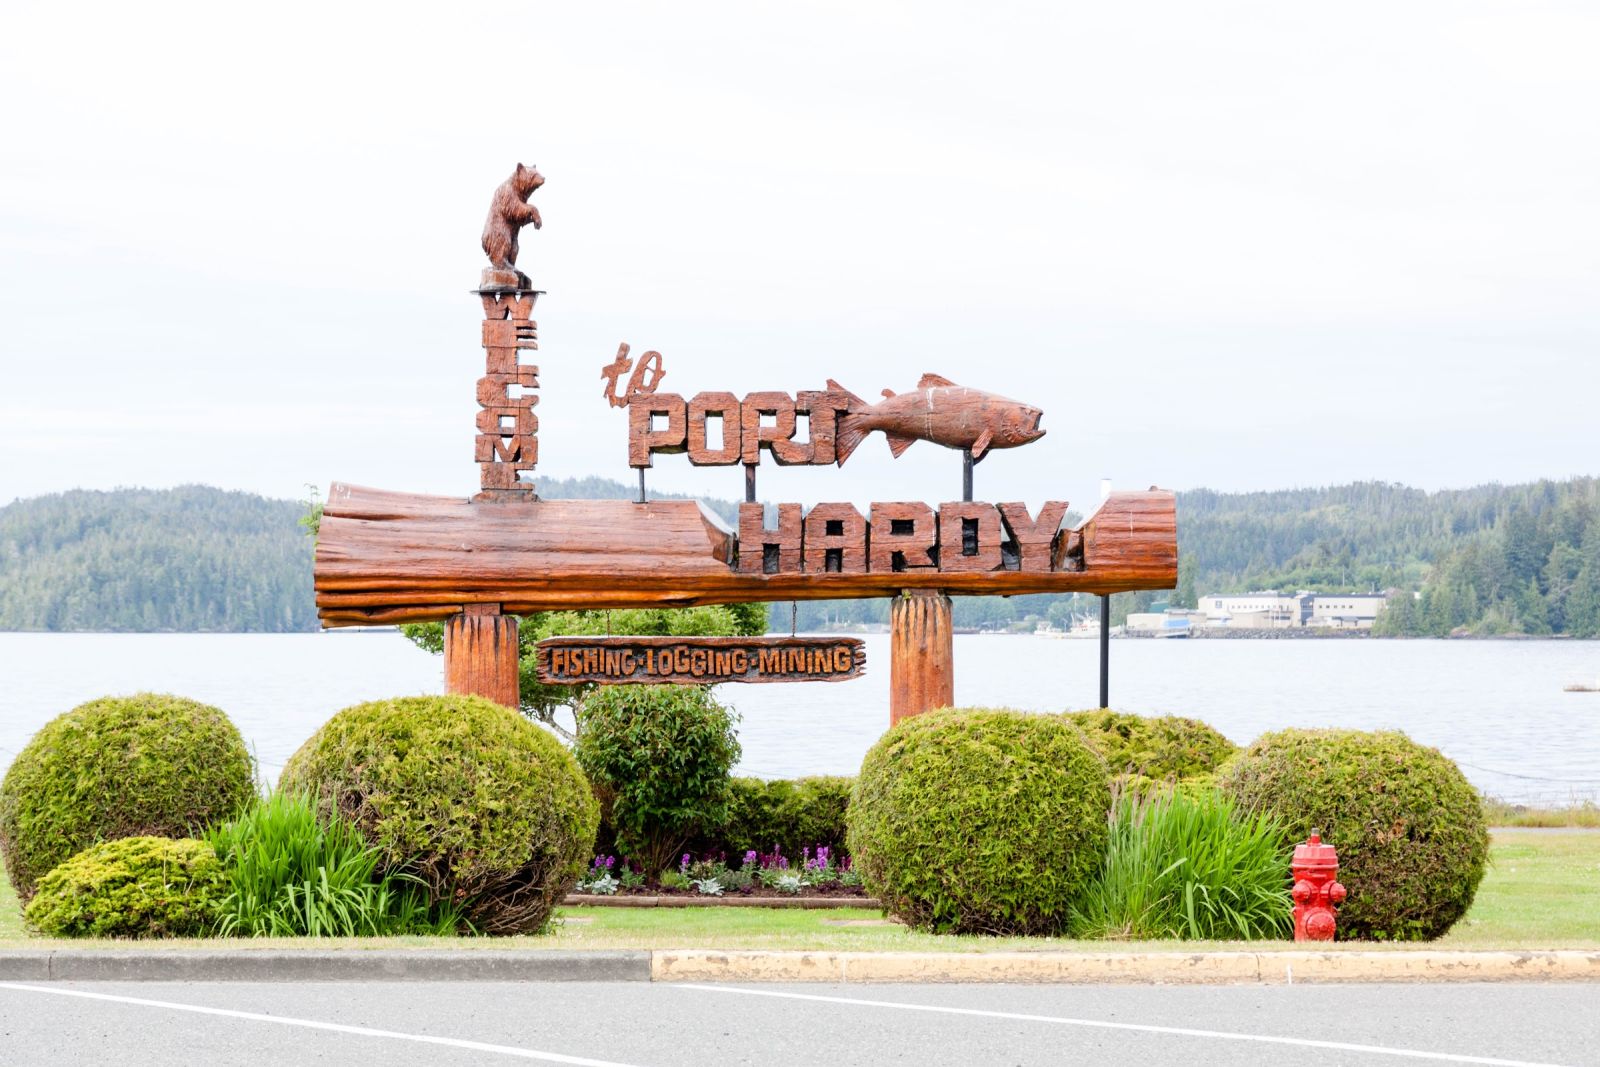 Illustration for article titled Pics from the 2017 North Island Roadtrip: 2017-06-17 at Port Hardy